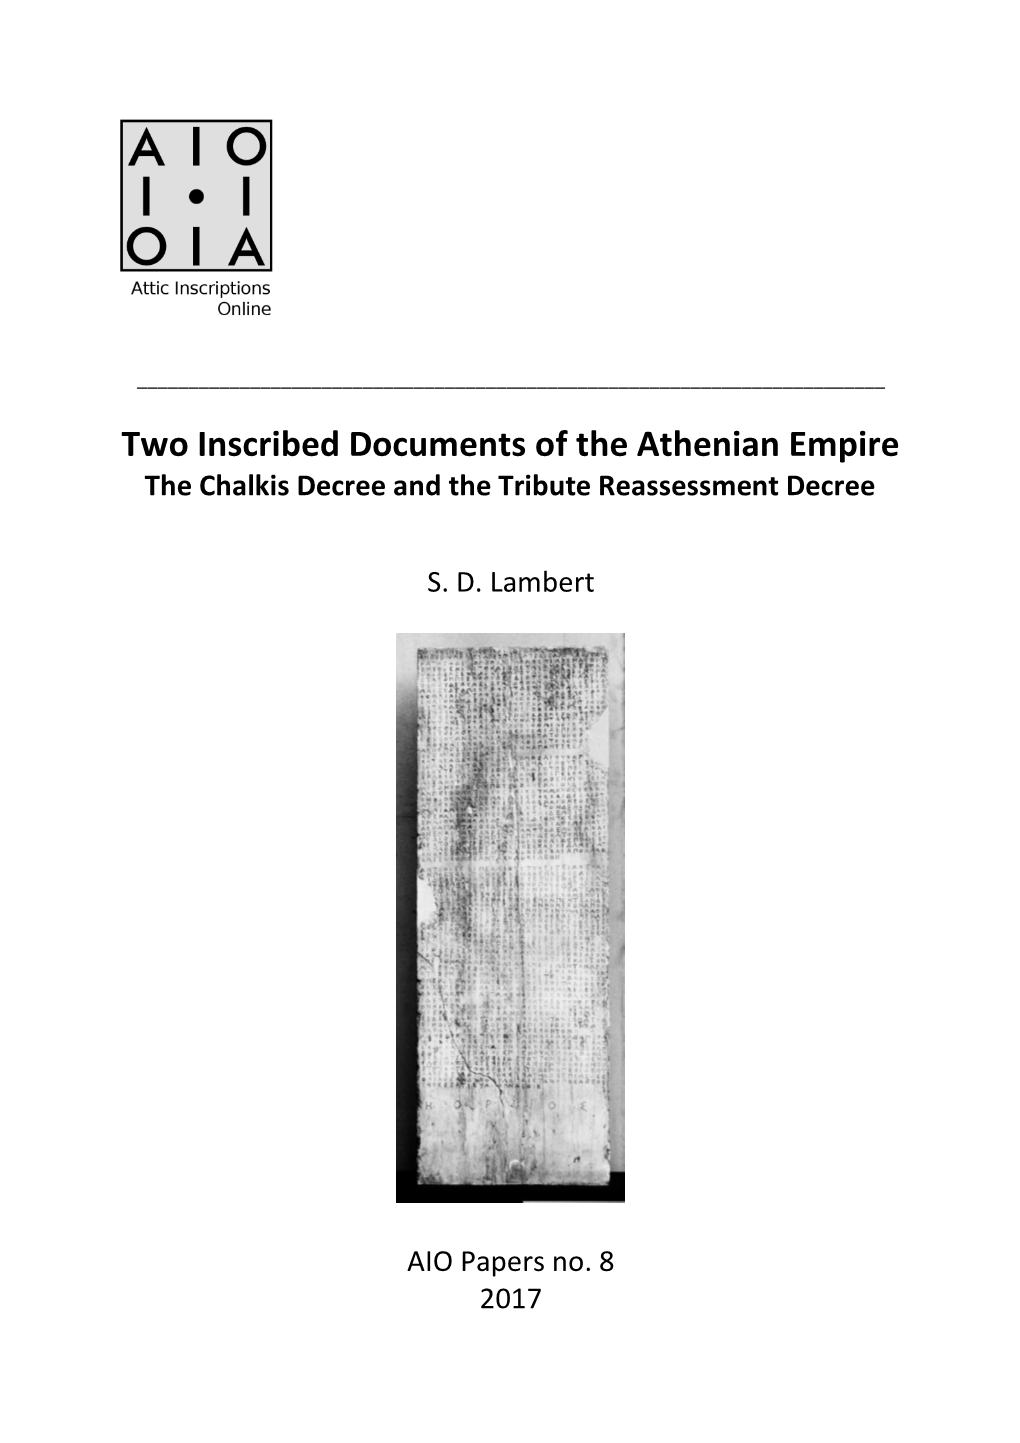 AIO Papers 8 Two Inscribed Documents of the Athenian Empire